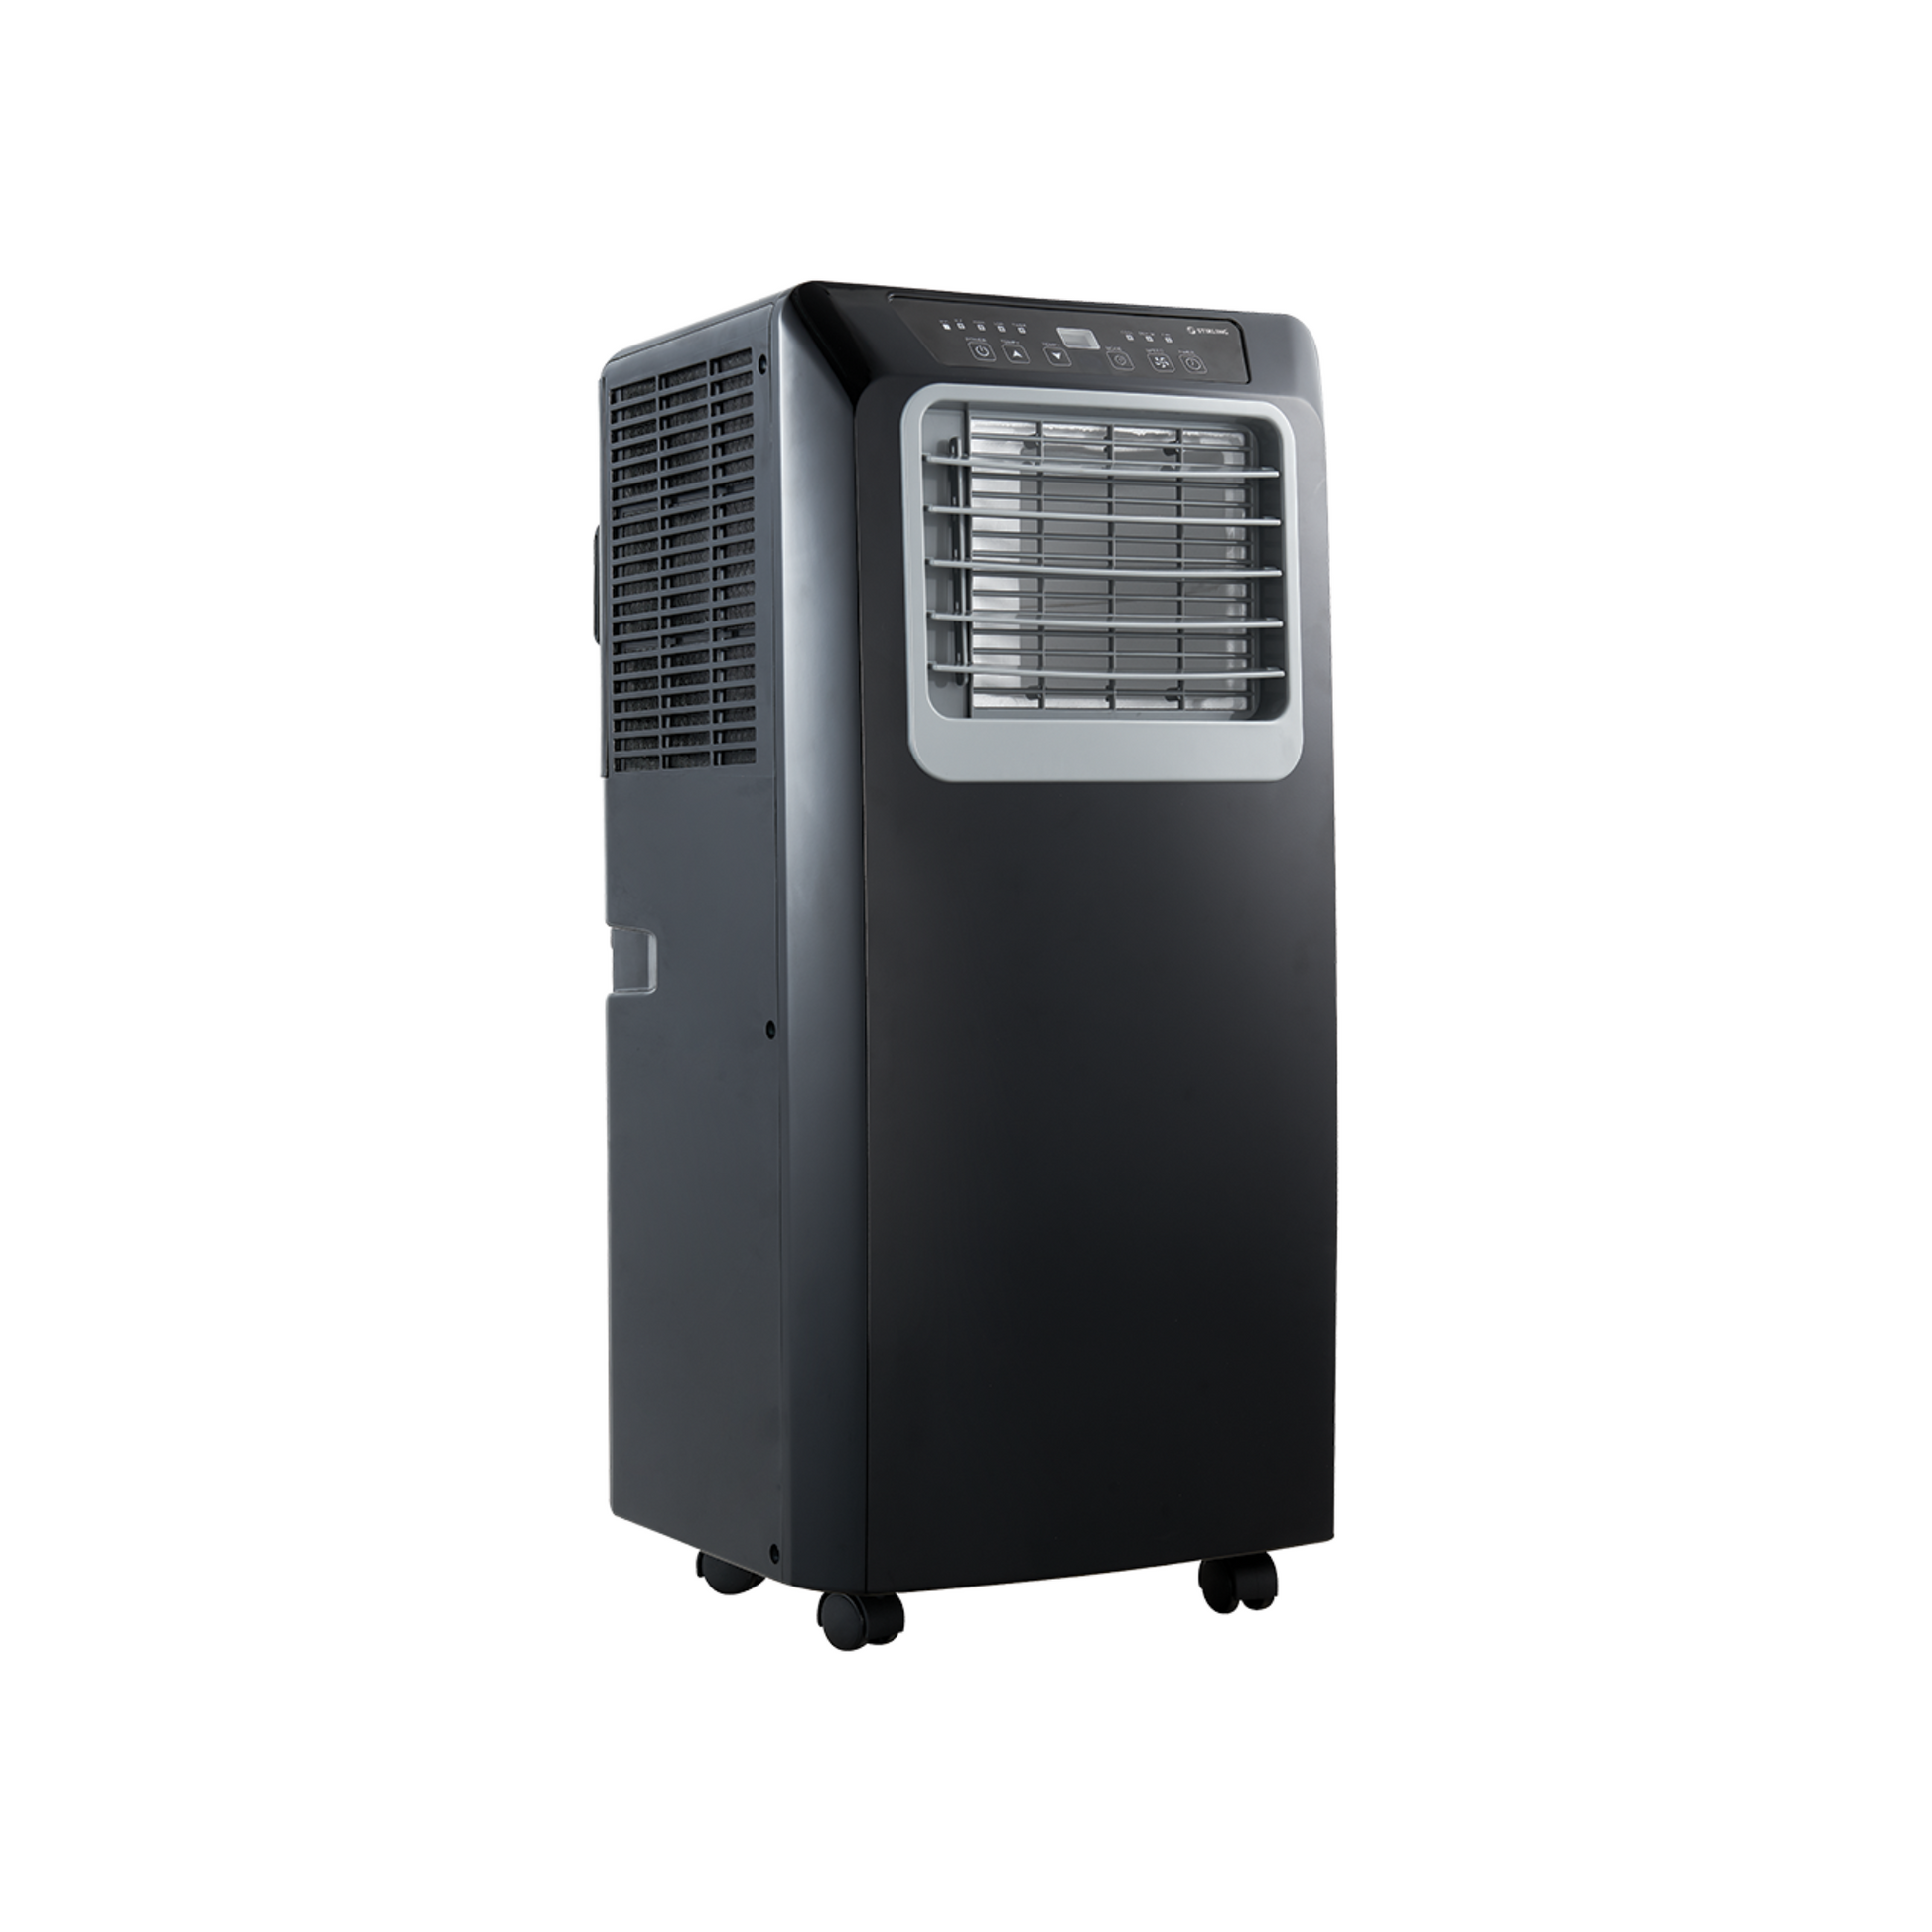 Stirling 2.7KW Portable WiFi Air Conditioner, PA27W